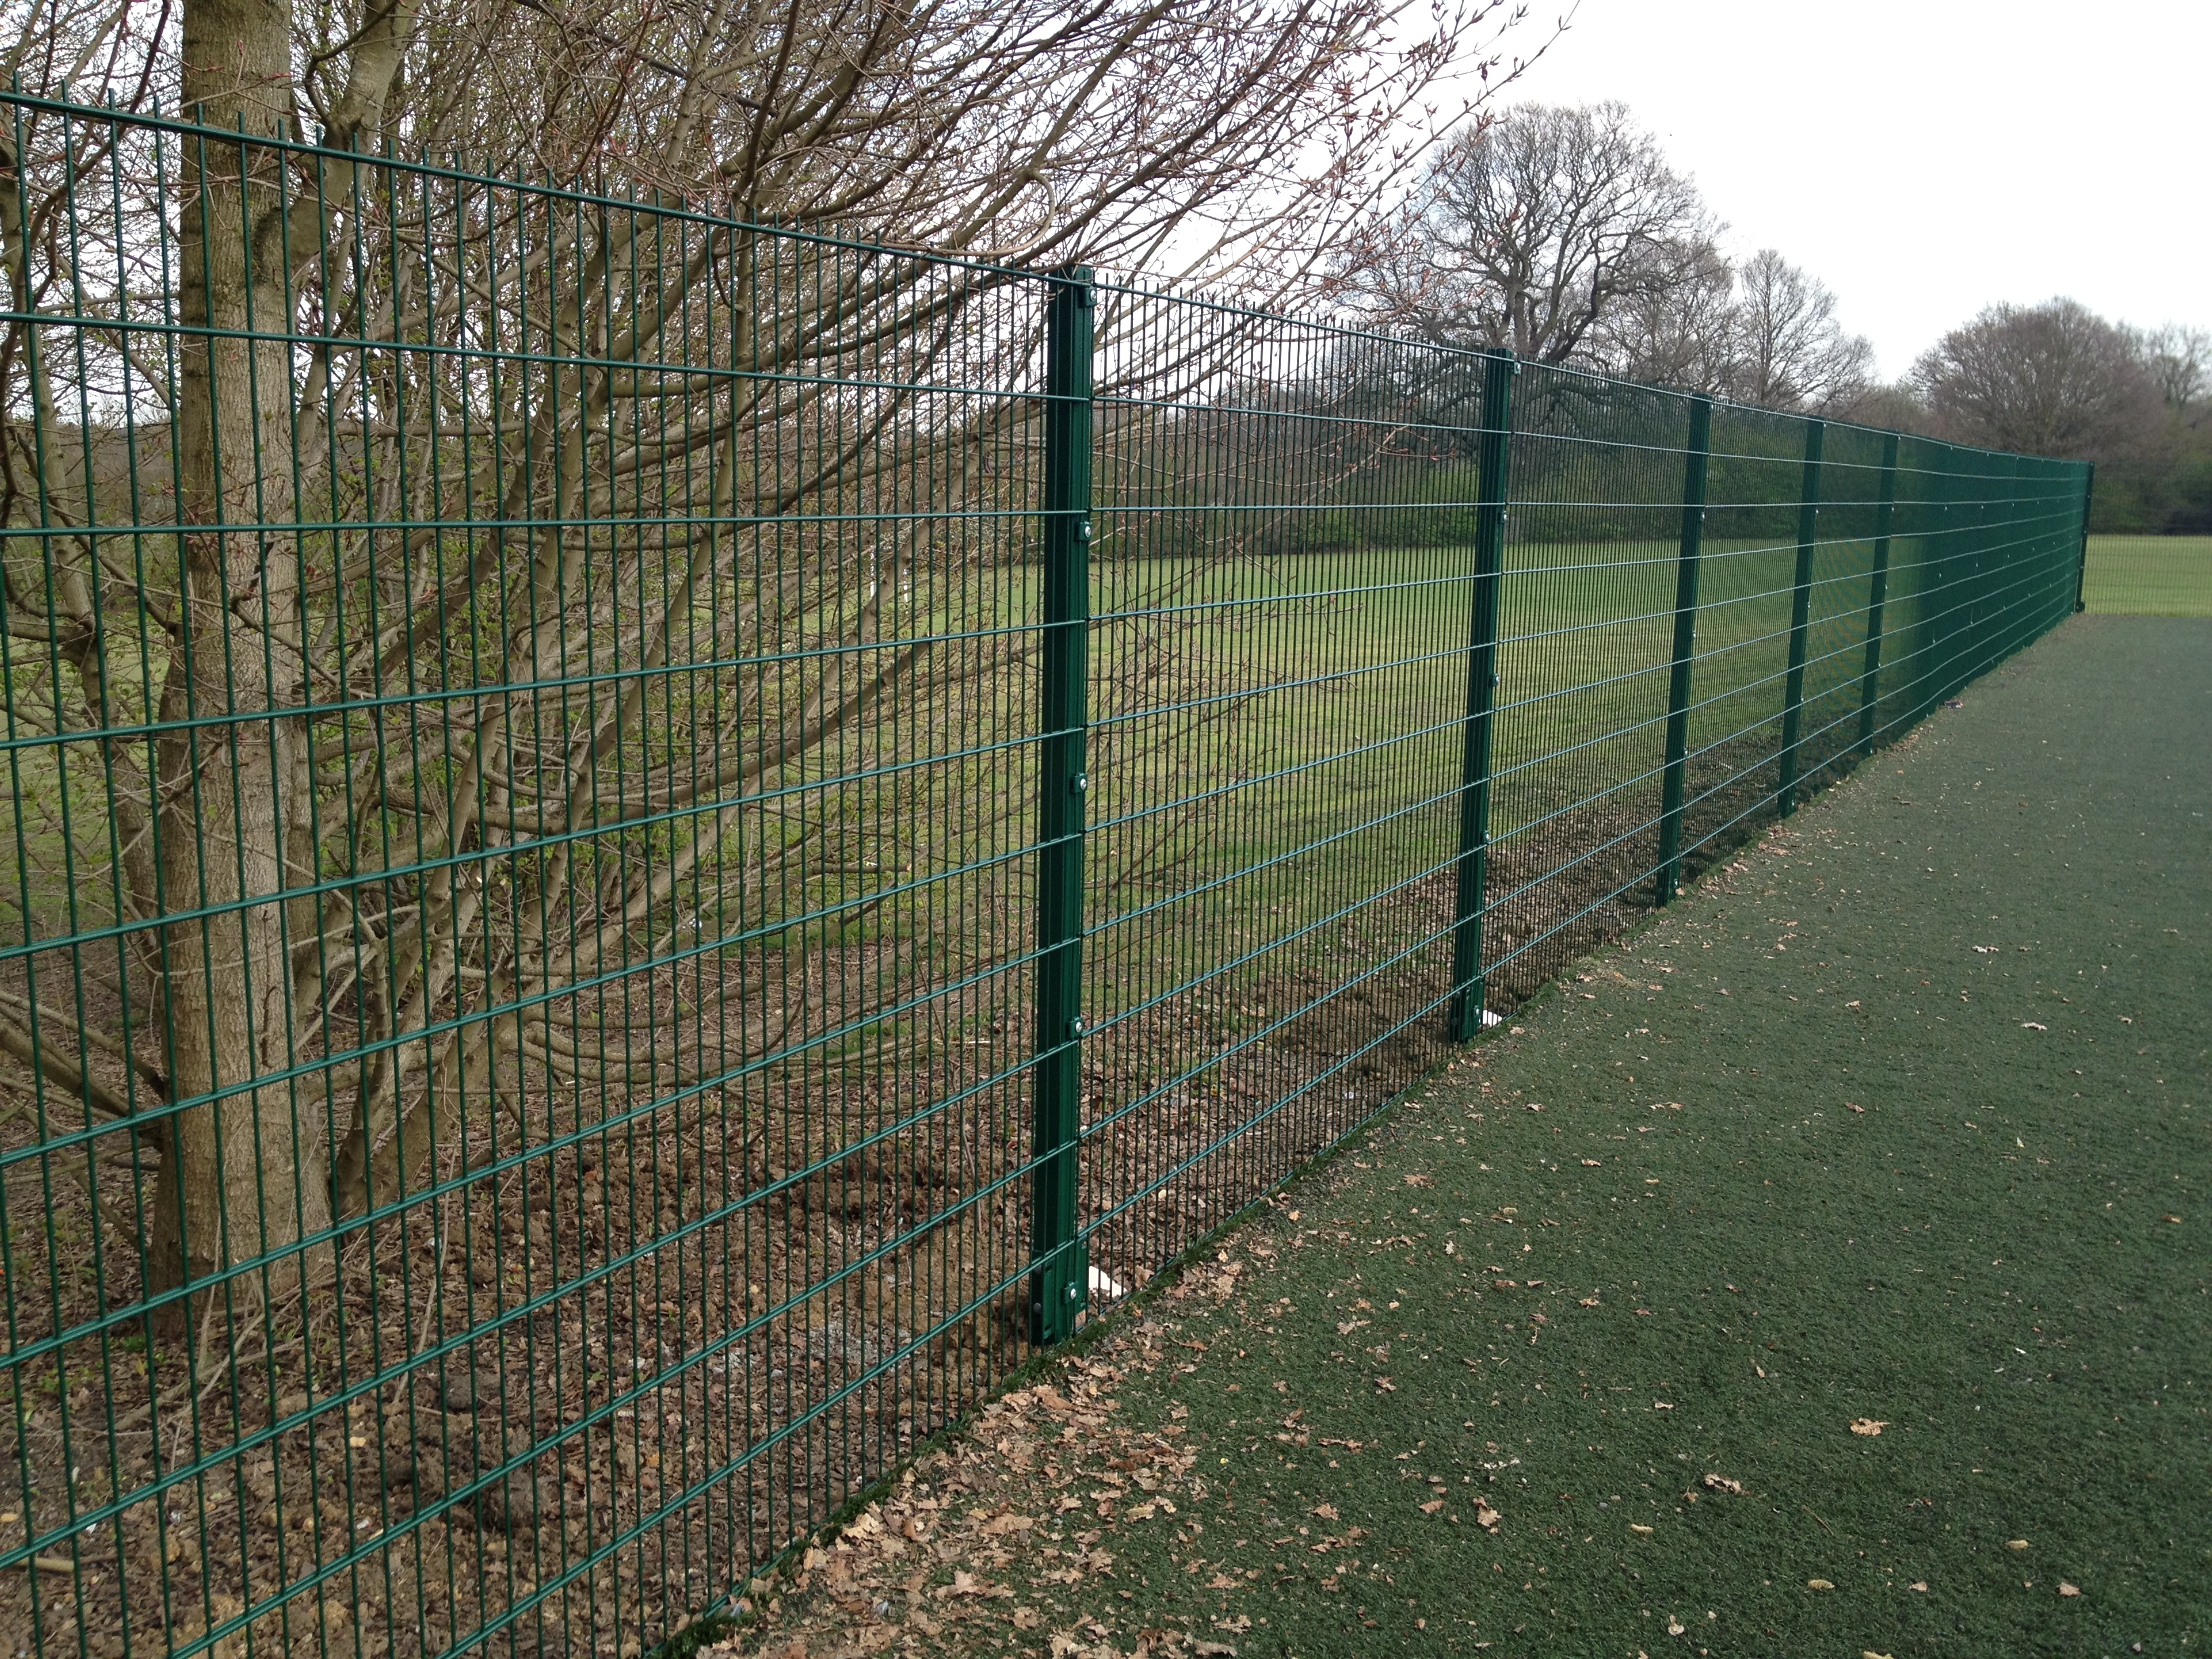 868 Mesh Panel Fencing, Security Fencing Brentwood, Essex, Industrial Fencing